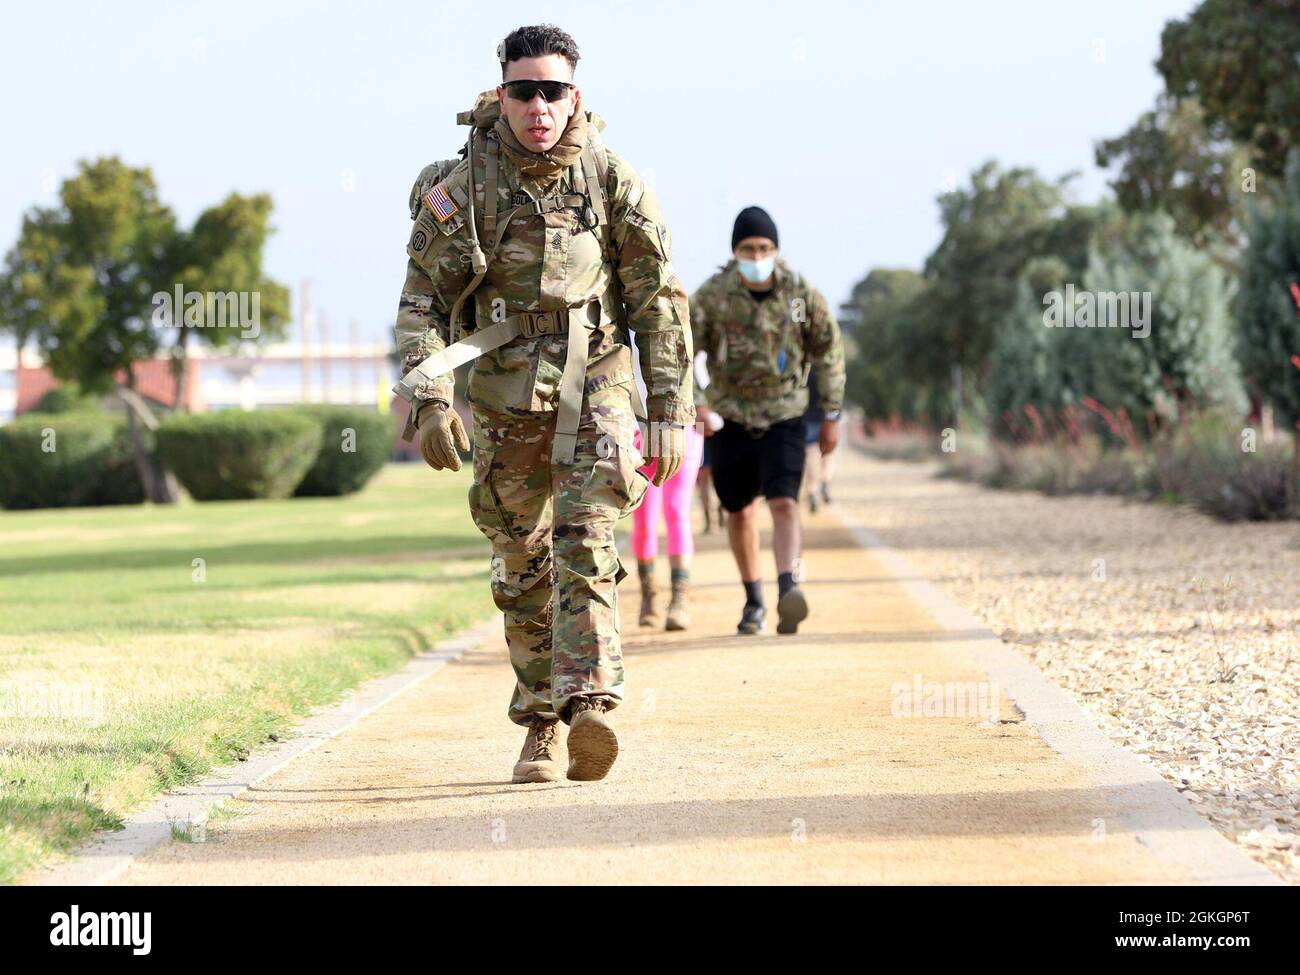 Command Sgt. Maj. Randy Randolph, the senior enlisted advisor of the 24th Theater Public Affairs Support Element, 1st Armored Division, walks toward the end of a first lap during a Bataan Death March on Fort Bliss, Texas, April 17, 2021. The march was in honor of the American and Filipino prisoners of war in the history of the Bataan Death March. The distance for the event was 26 miles, and Soldiers participated in the march with their families. Stock Photo